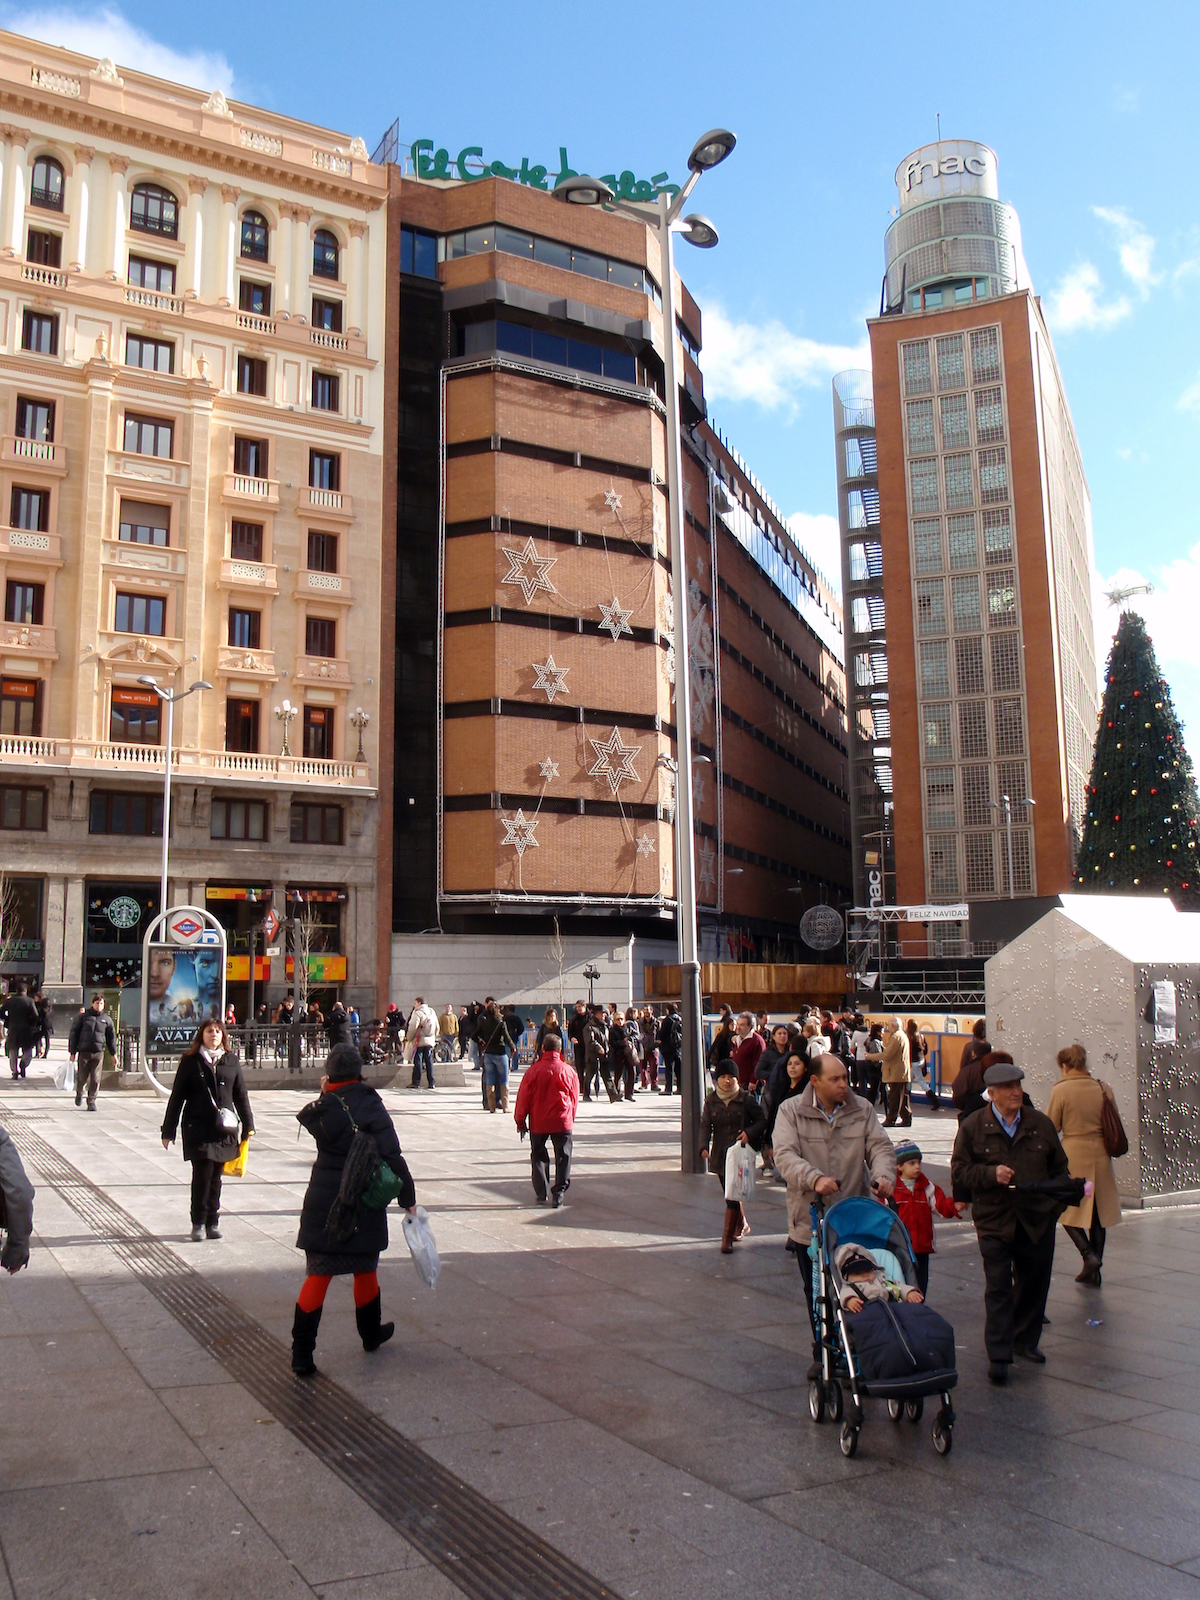 El Corte Ingles - All You Need to Know BEFORE You Go (with Photos)